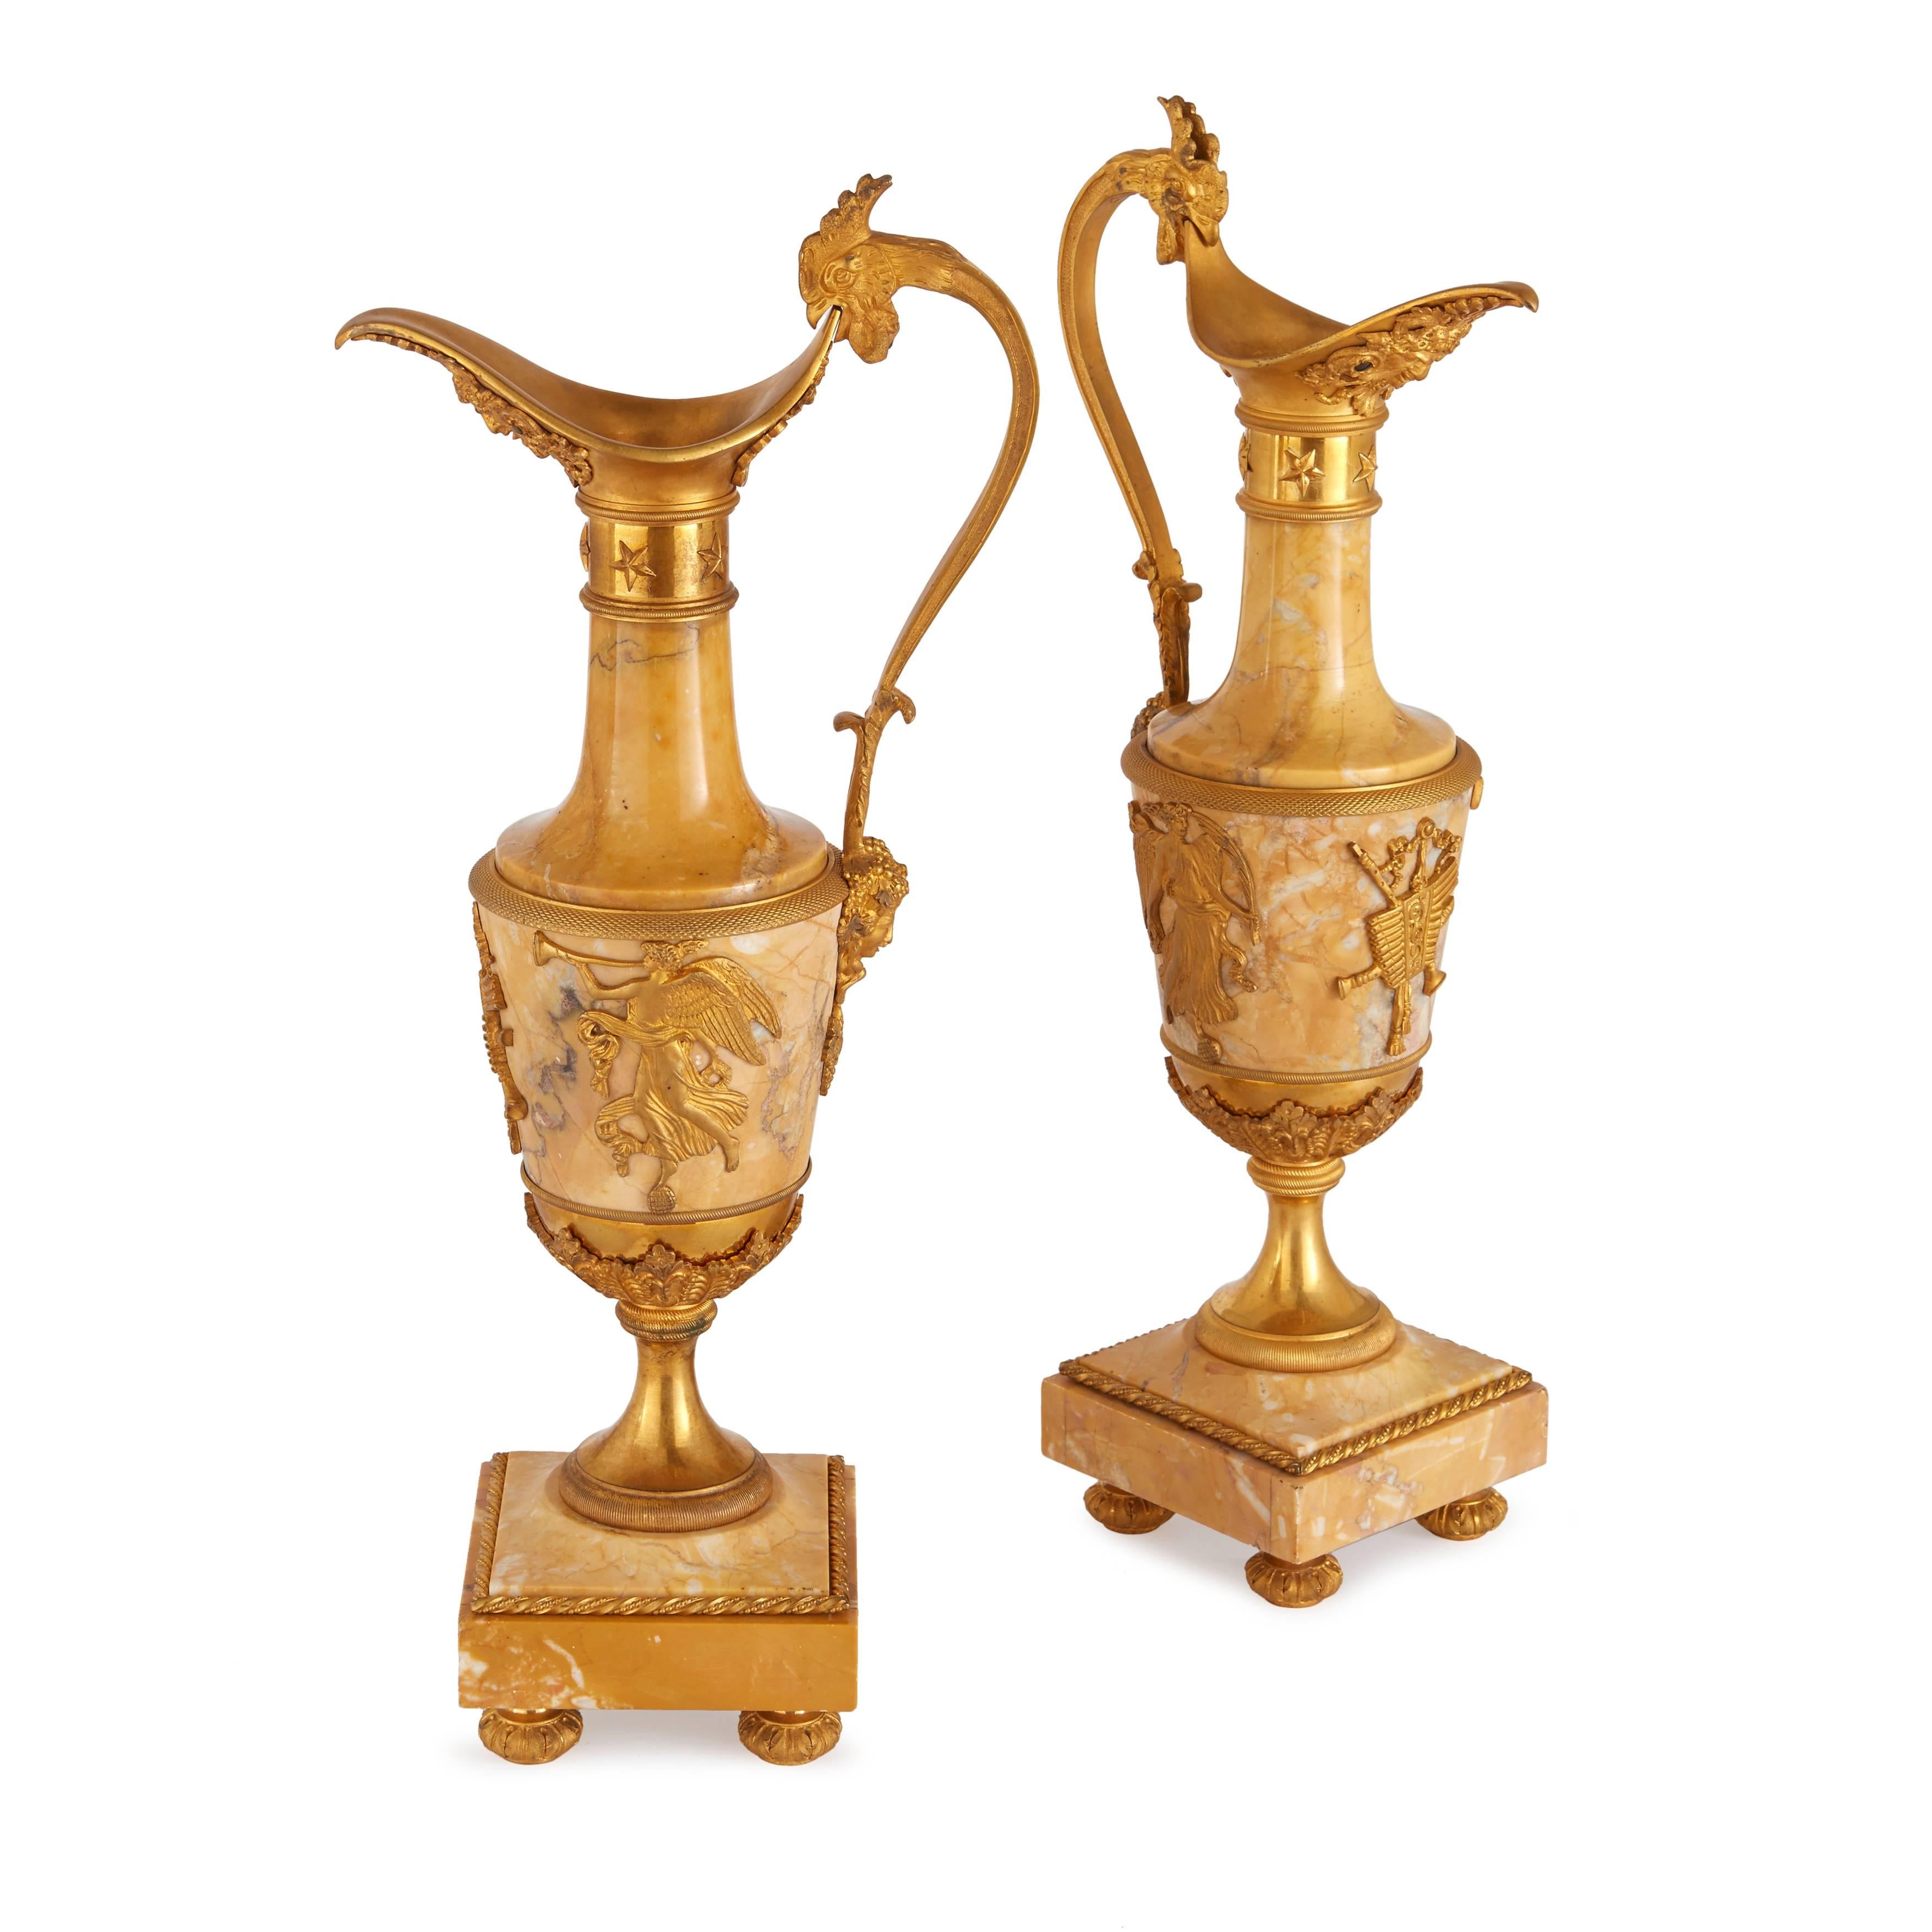 In the form of Amphora ewers, each ornately mounted with masks by the spout, handle in the form of a rooster at the top, with a mask at the end, the body appliqued with allegories of music, on a square base with ormolu mounted feet.